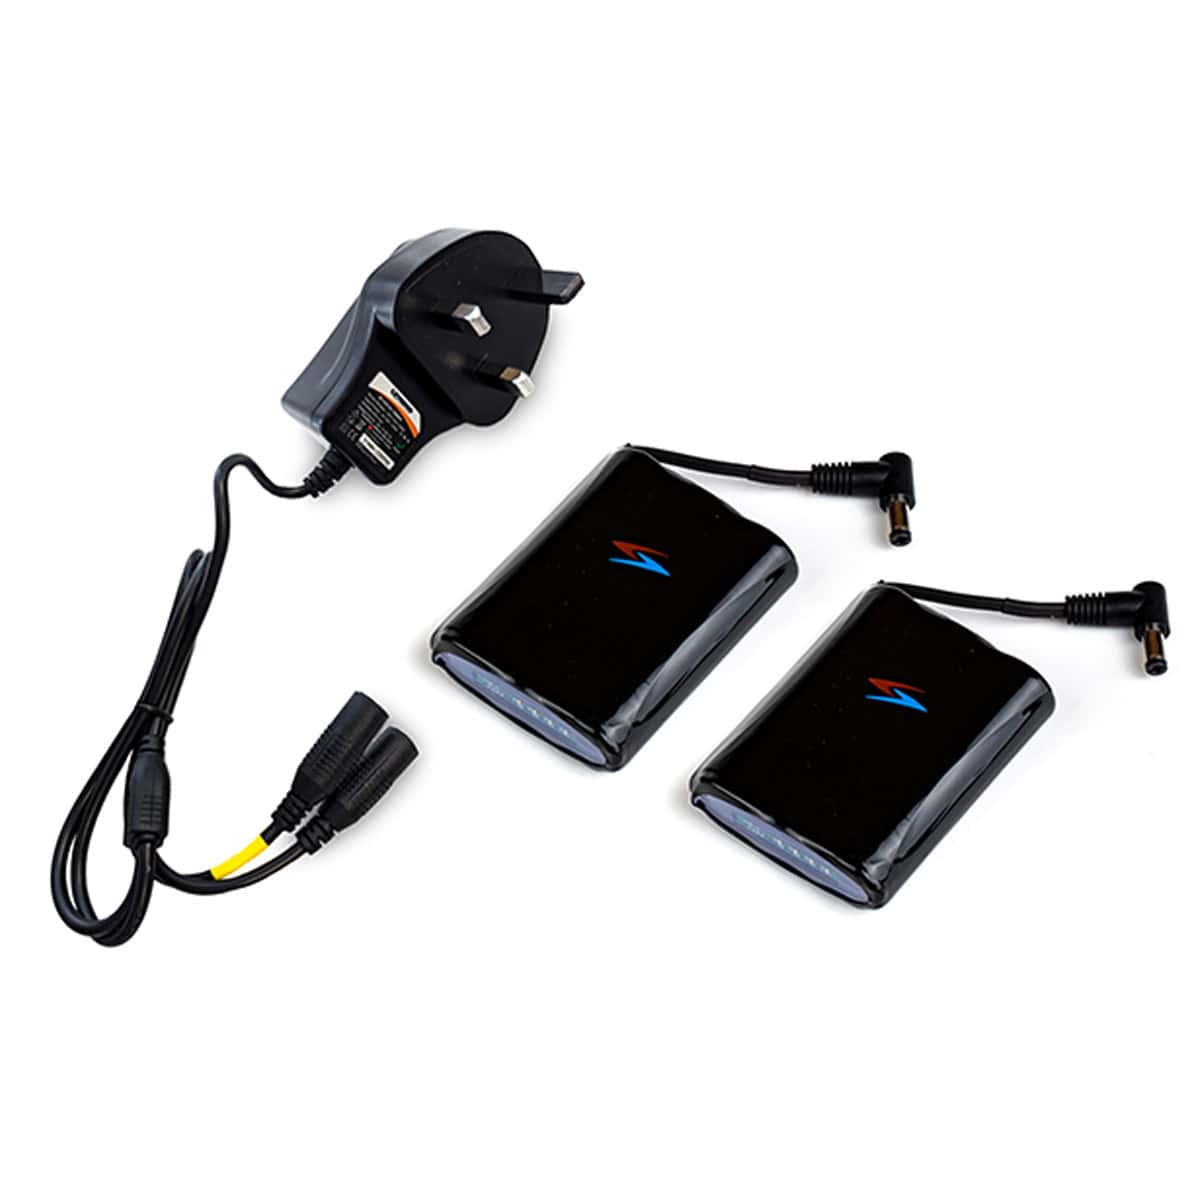 Richa battery kit and charger for heated gloves